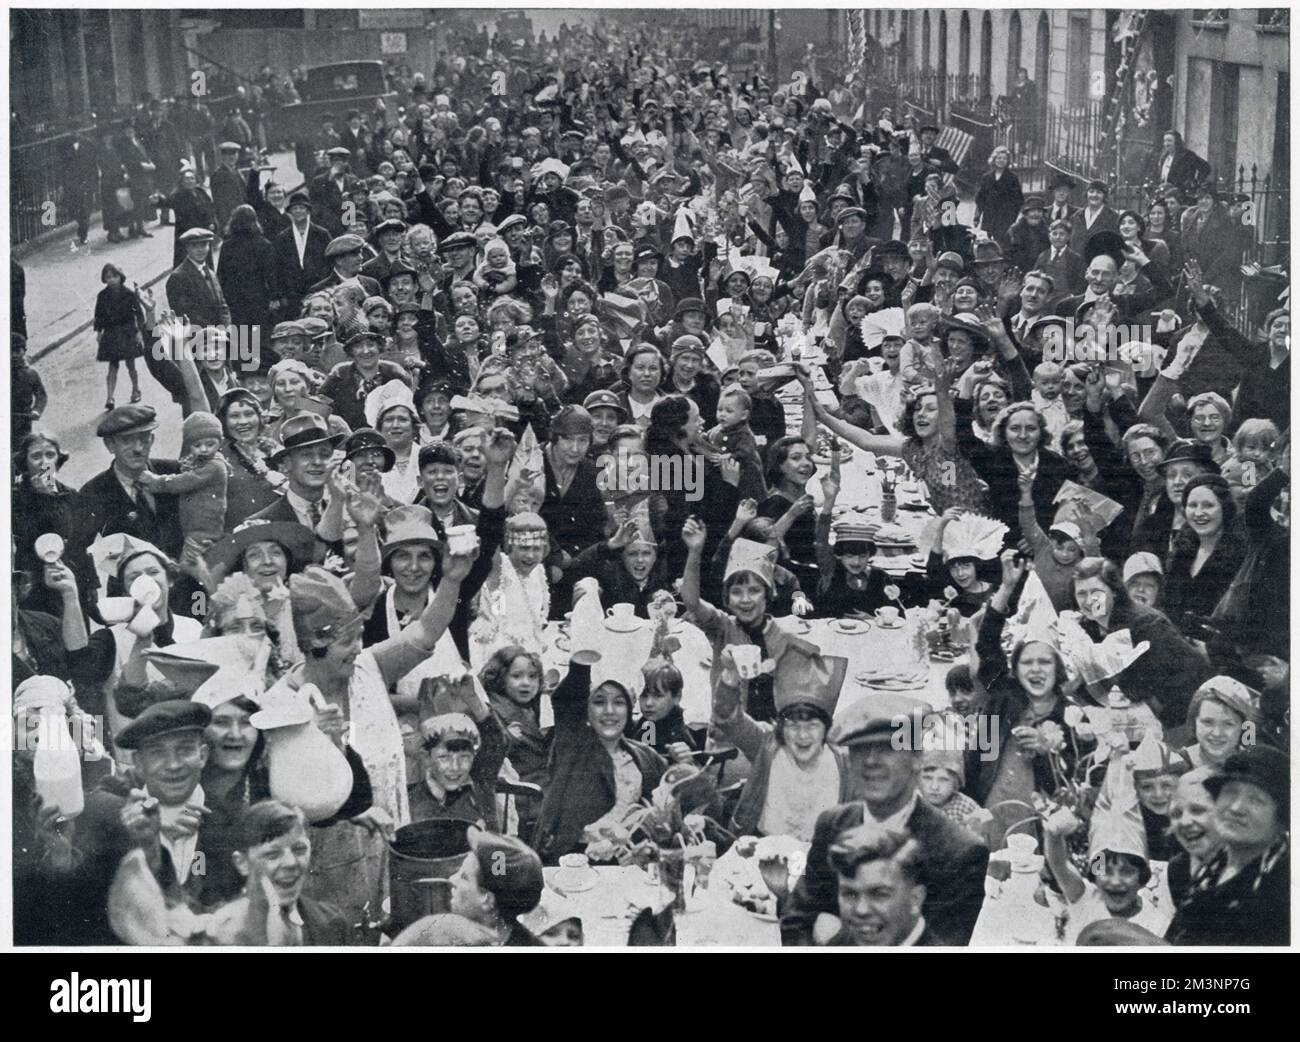 One of the many tea-parties held in the streets of London for poor children, in celebration of the Silver Jubilee of King George V. Stock Photo